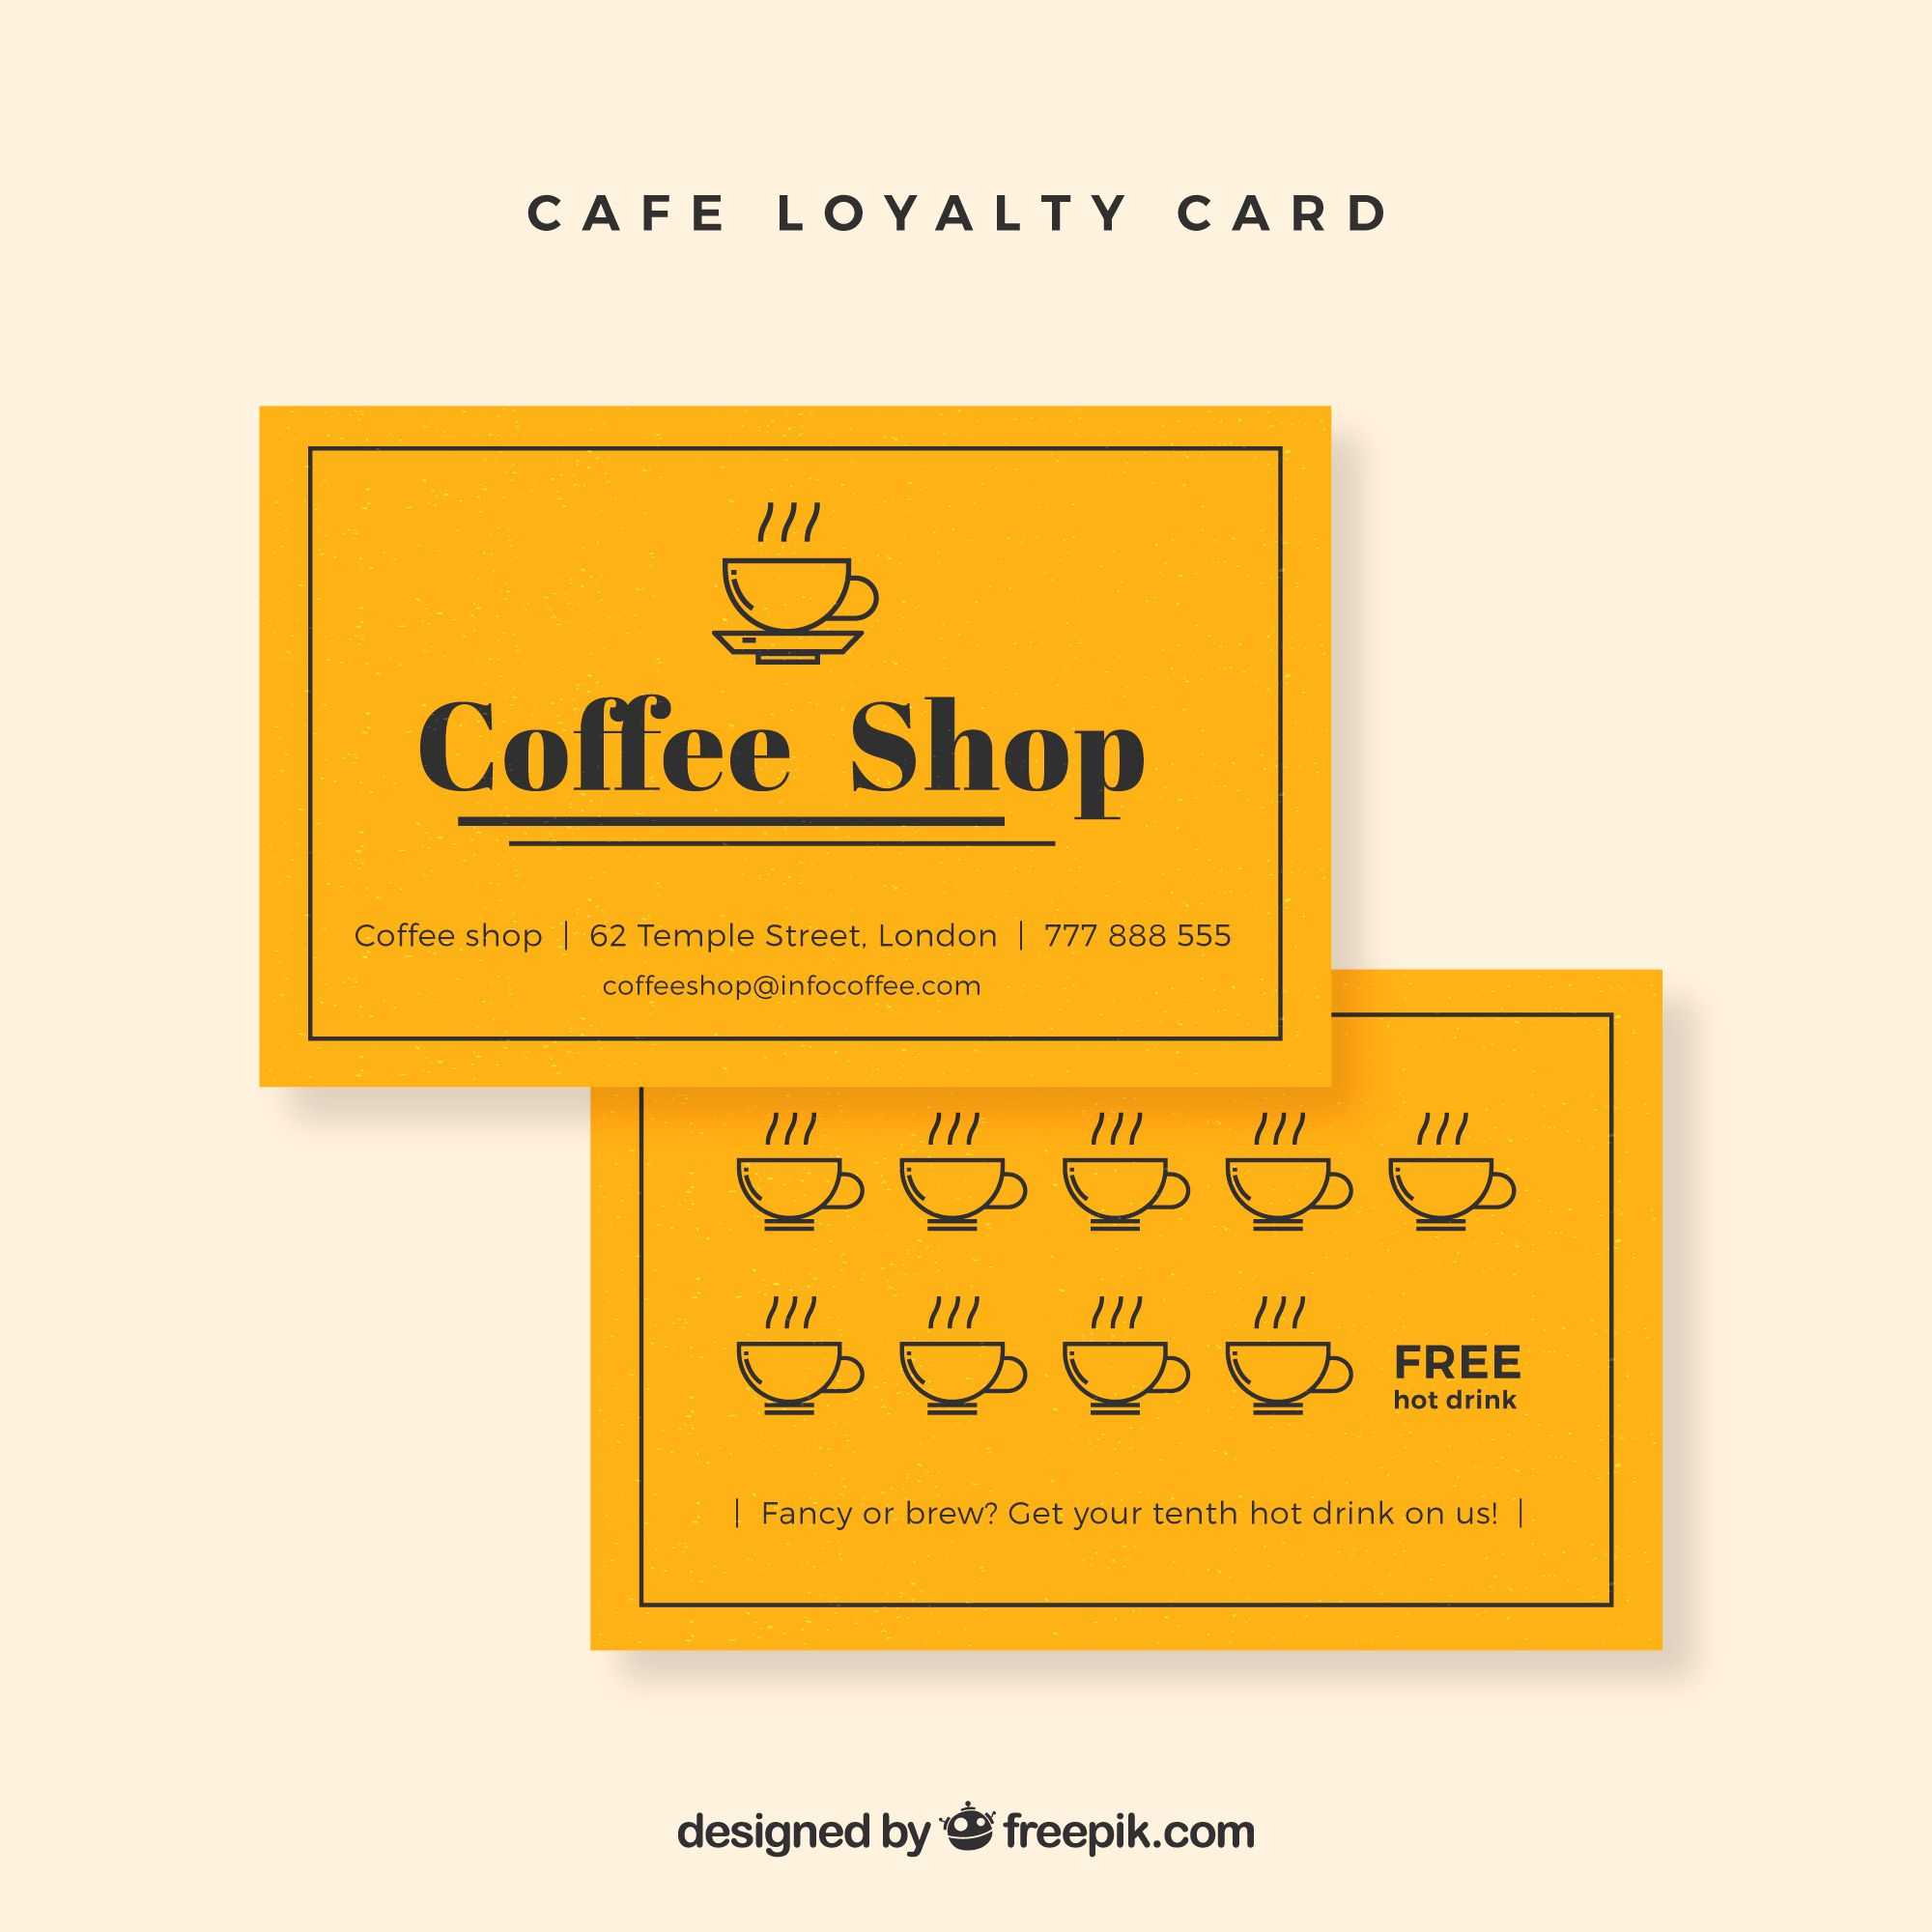 Cafe Loyalty Card | Business Cards | Loyalty Card Design With Loyalty Card Design Template